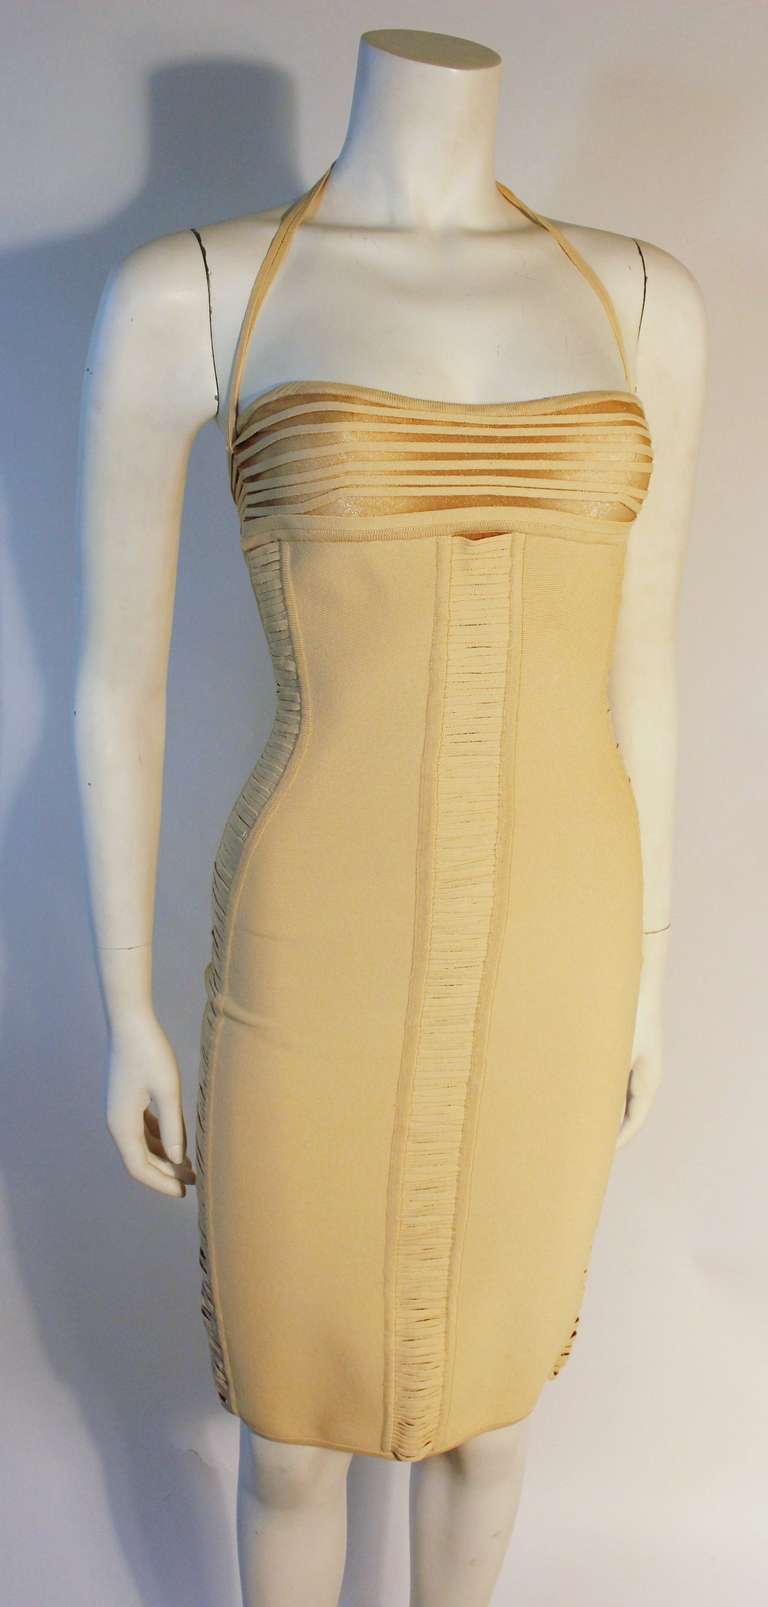 This is a wonderful Herve Leger cream halter bandage dress. This mini dress features a back zipper and hand tacked strips backed by a sheer metallic material. Wonderful for day and night looks. 

Measurements 
Unstretched-Stretched  
Length 37